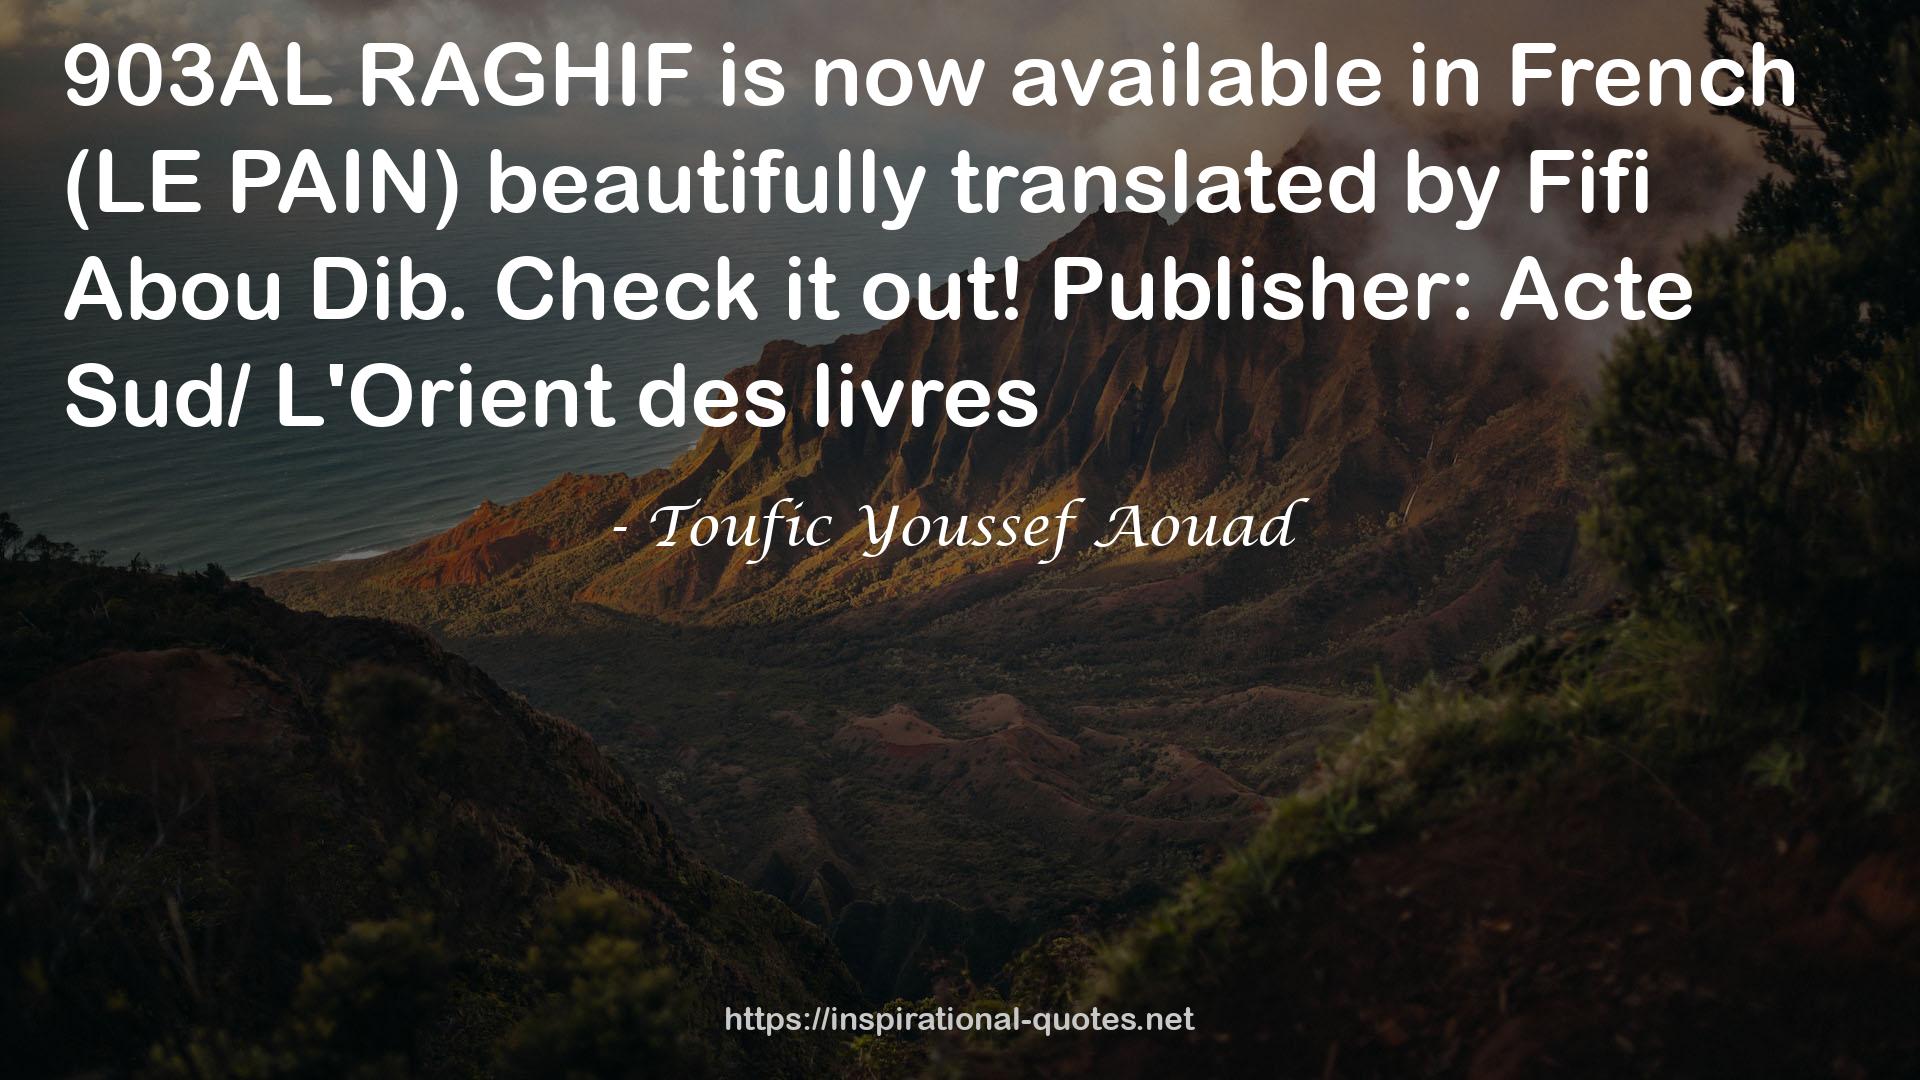 Toufic Youssef Aouad QUOTES